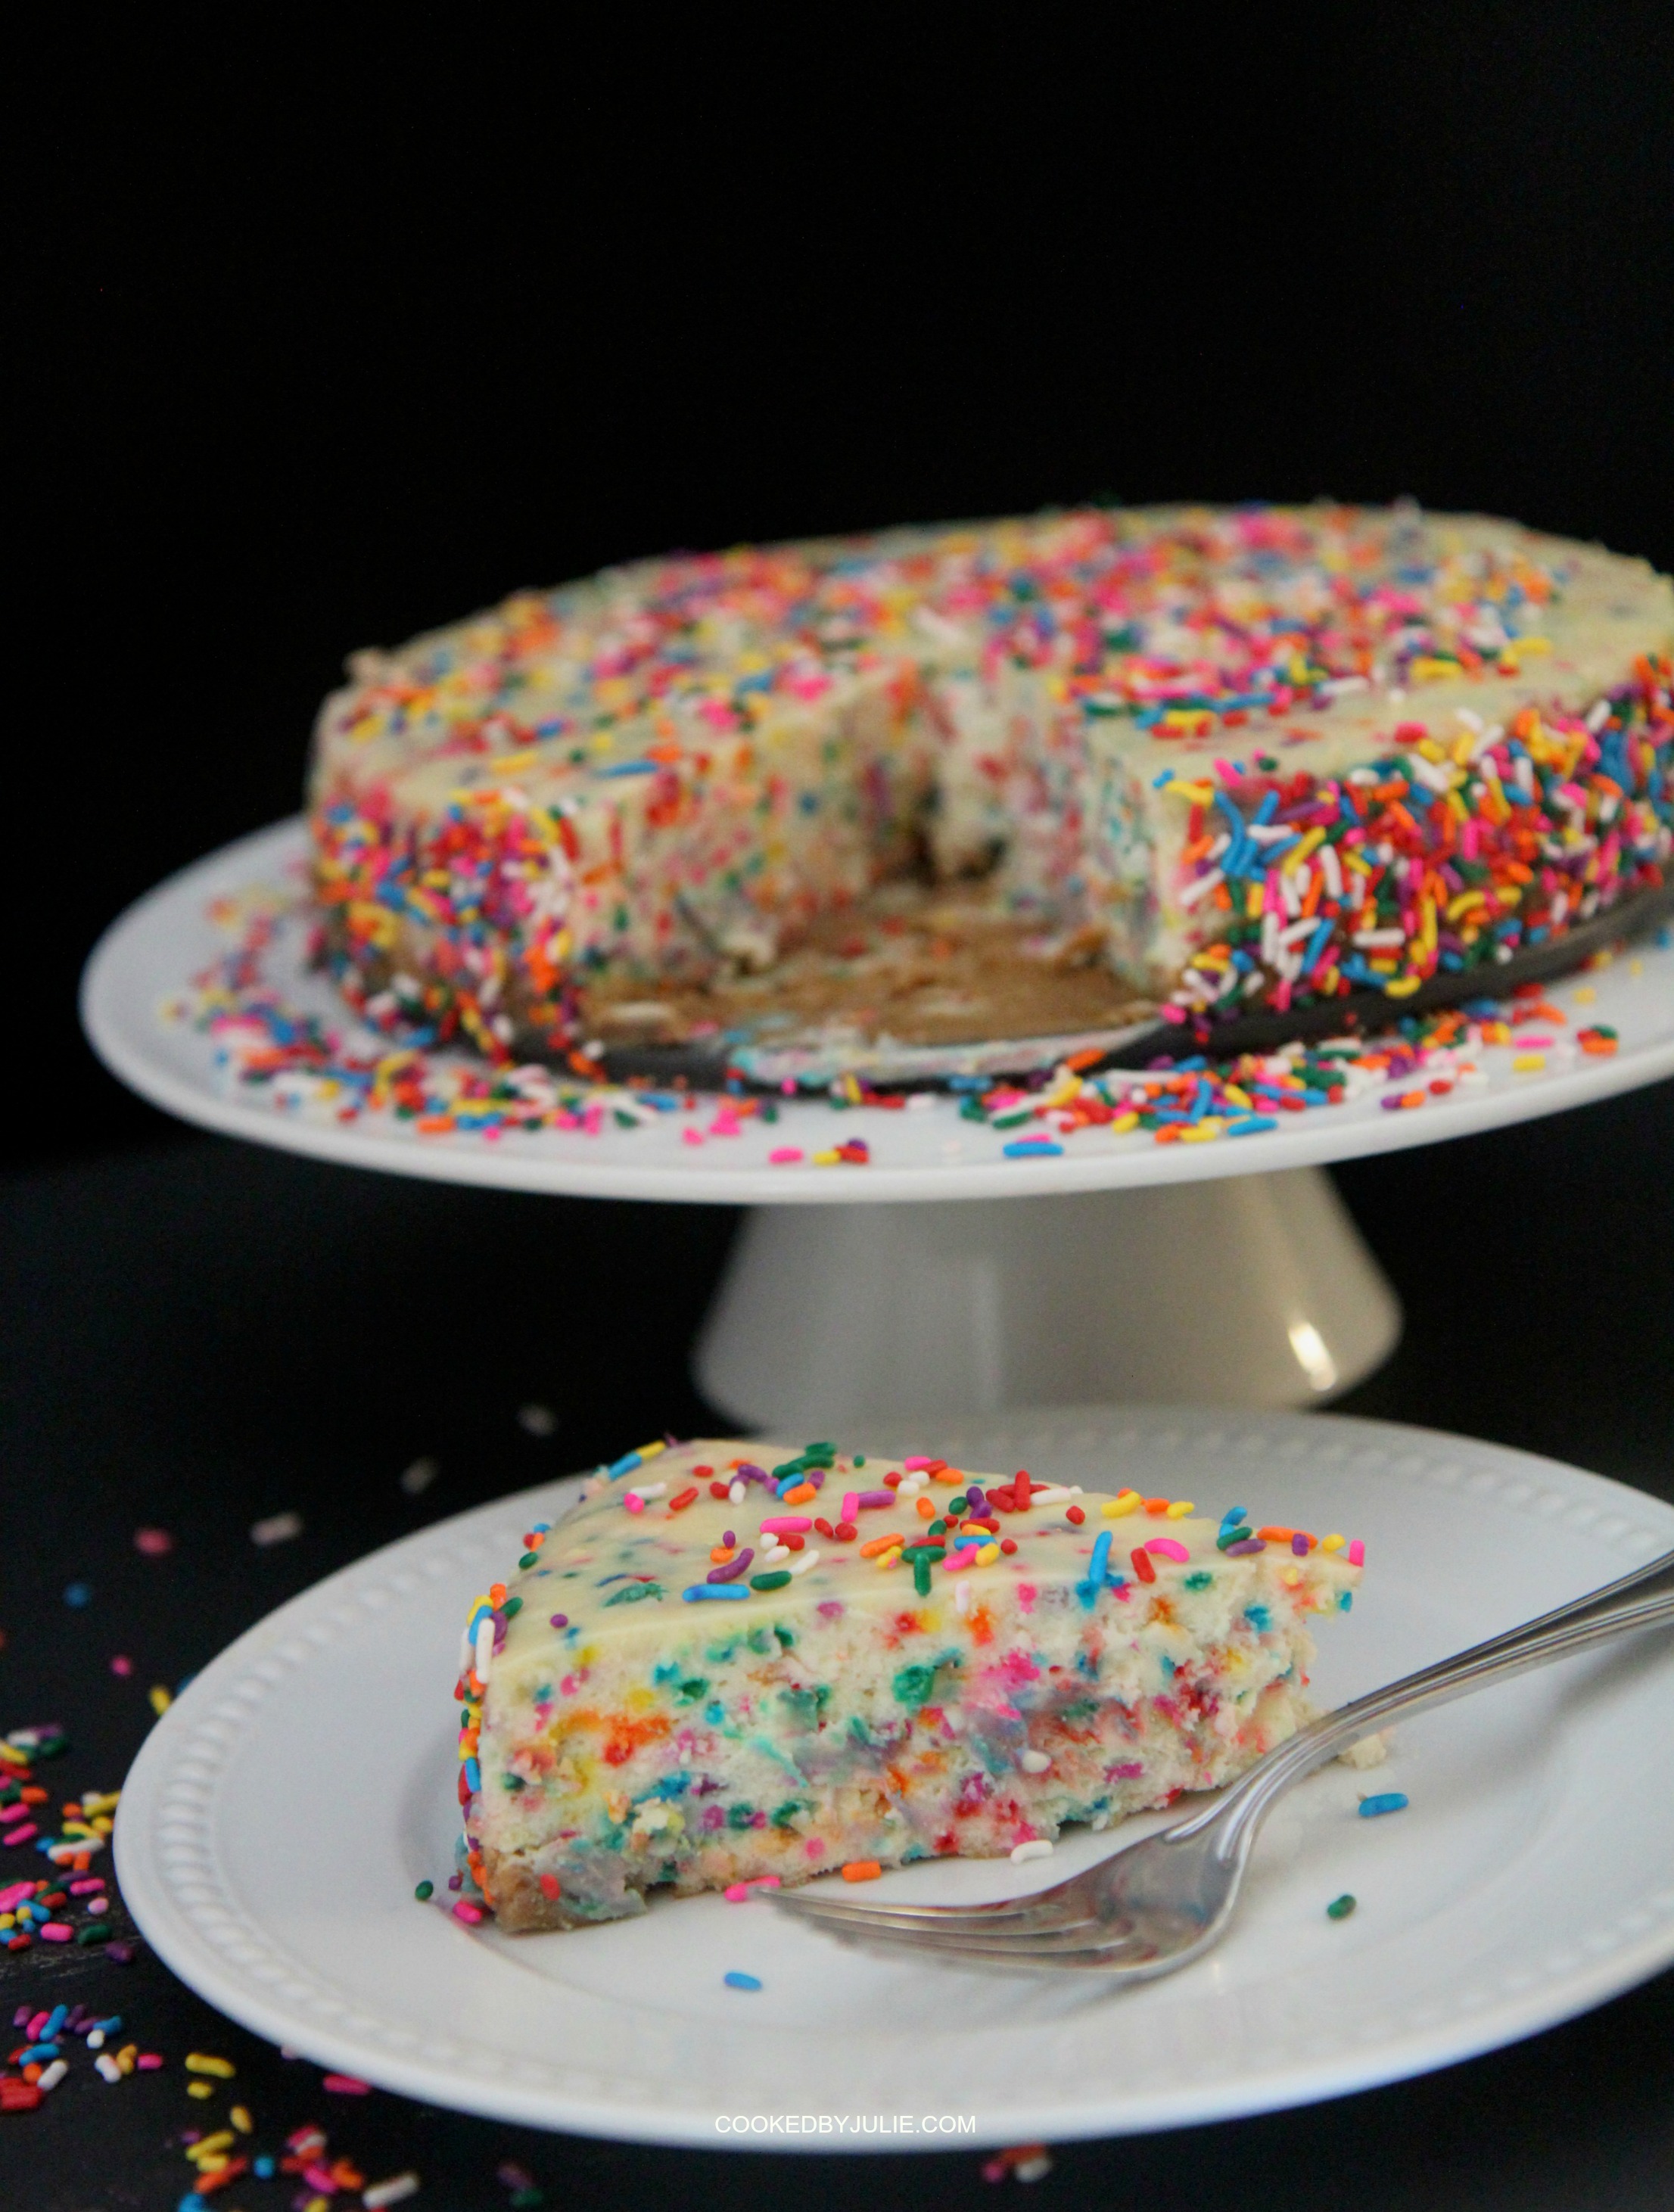 Everybody loves sprinkles, right? This is a fun cheesecake to bake and eat.